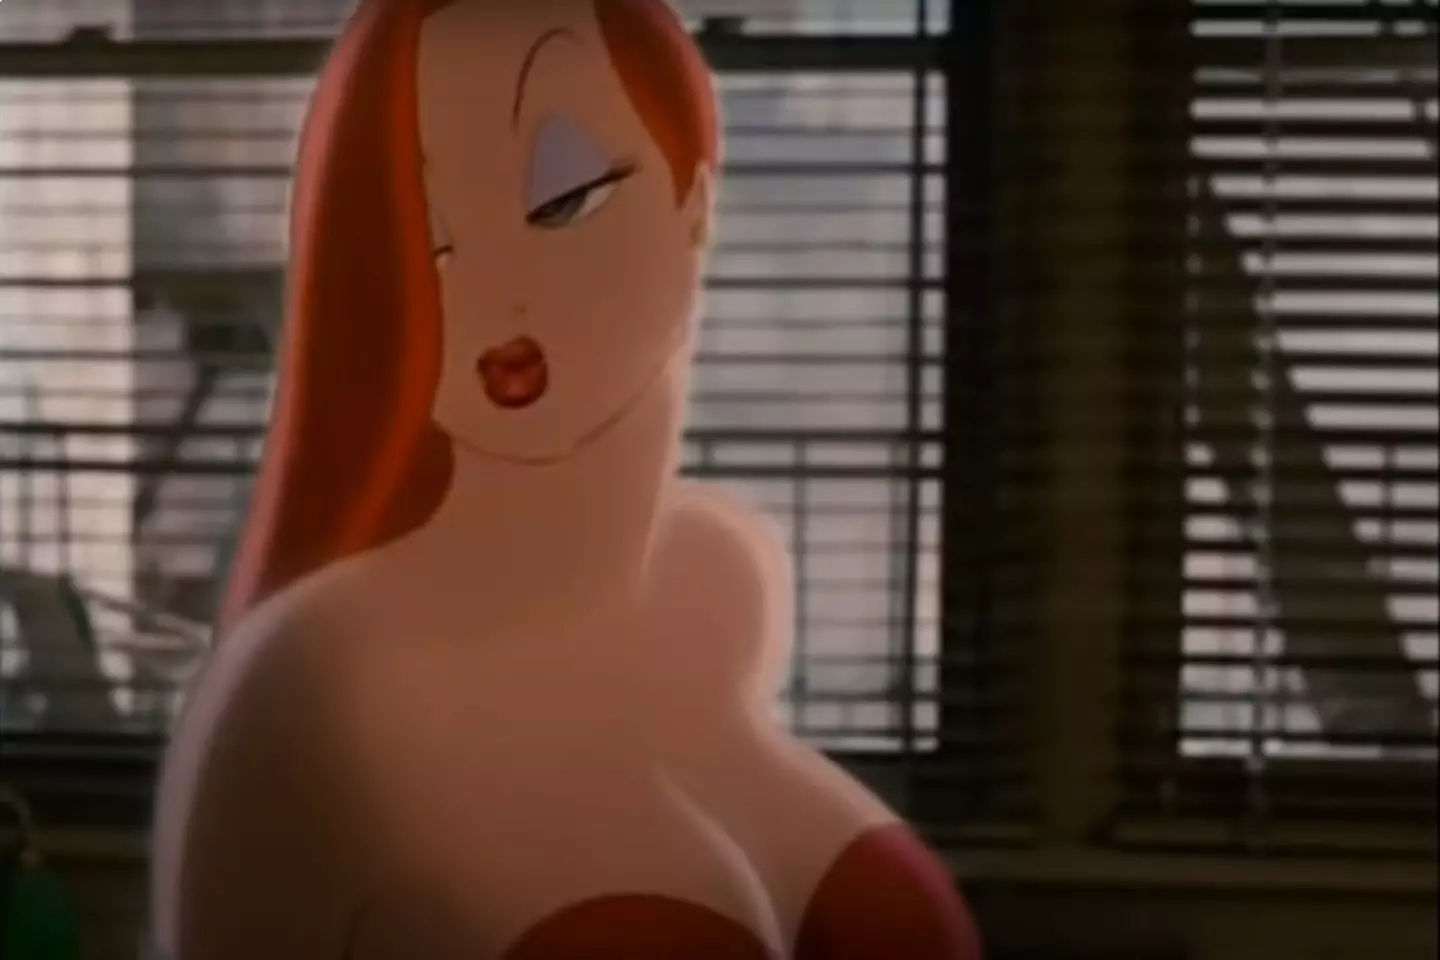 Jessica Rabbit has the sole distinction of being the only cartoon character to crack the top ten most paused movie moments.